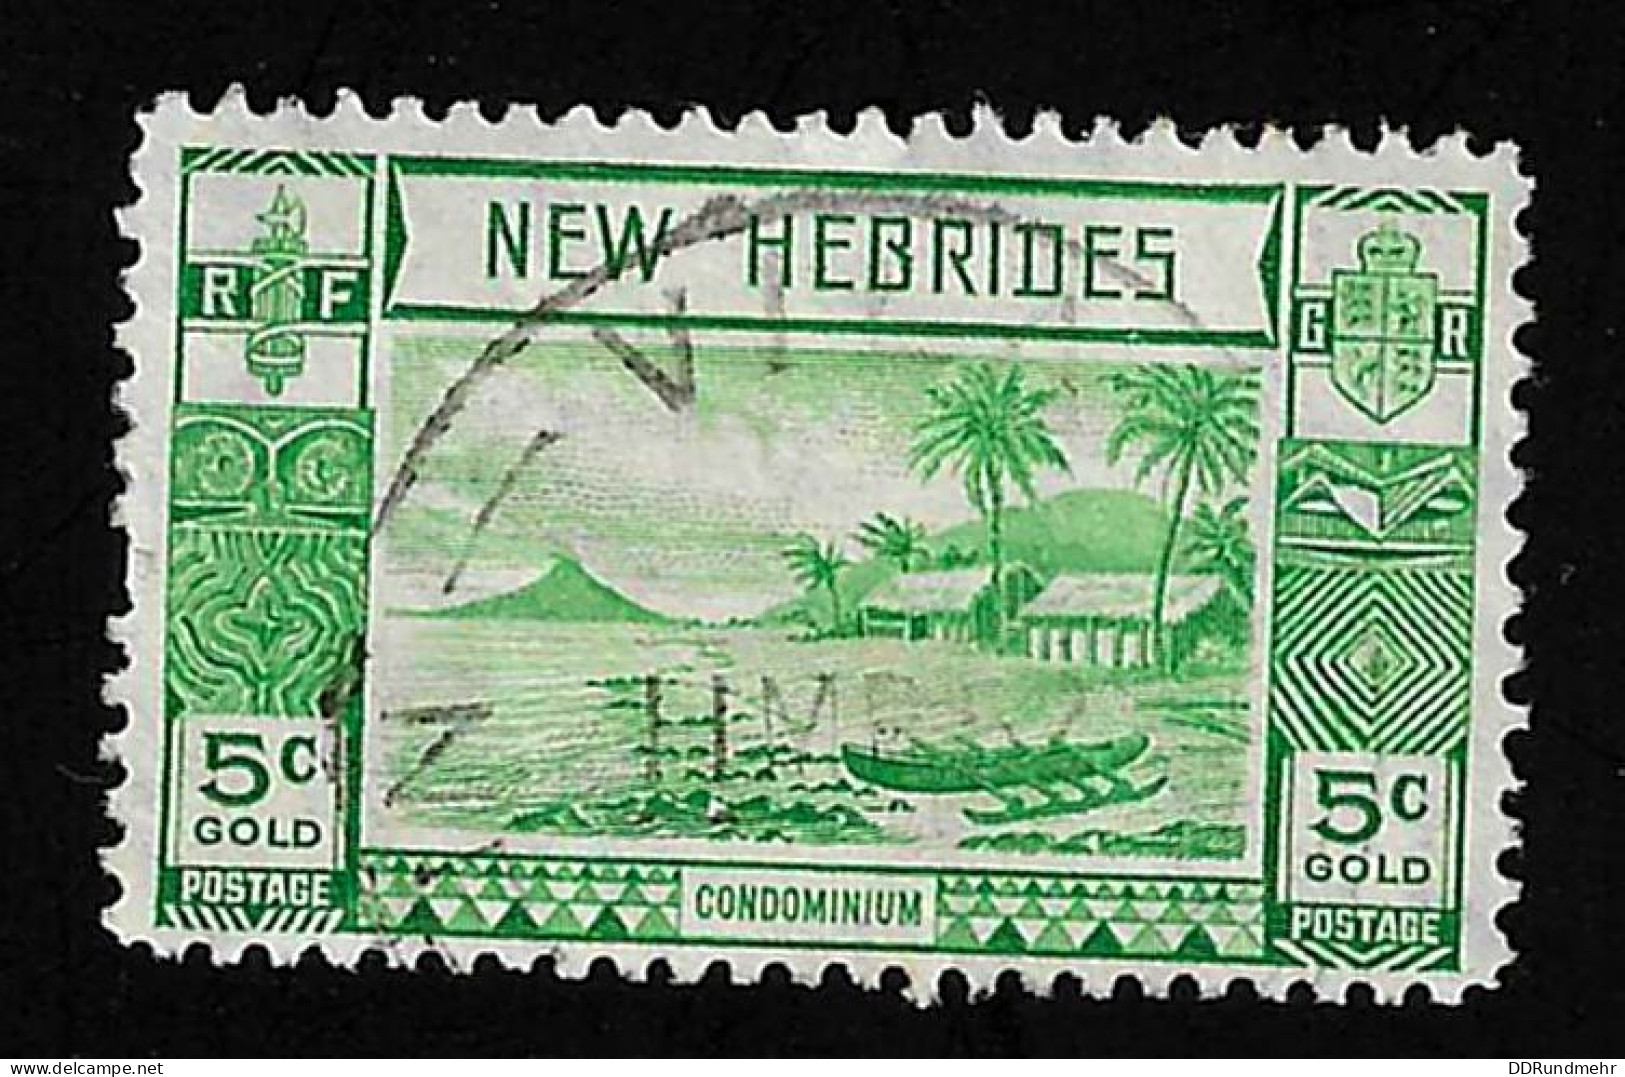 1938 Lopevi  Michel NH 97 Stamp Number NH-BR 50 Yvert Et Tellier NH 112 Stanley Gibbons NH-BR 52 Used - Postage Due